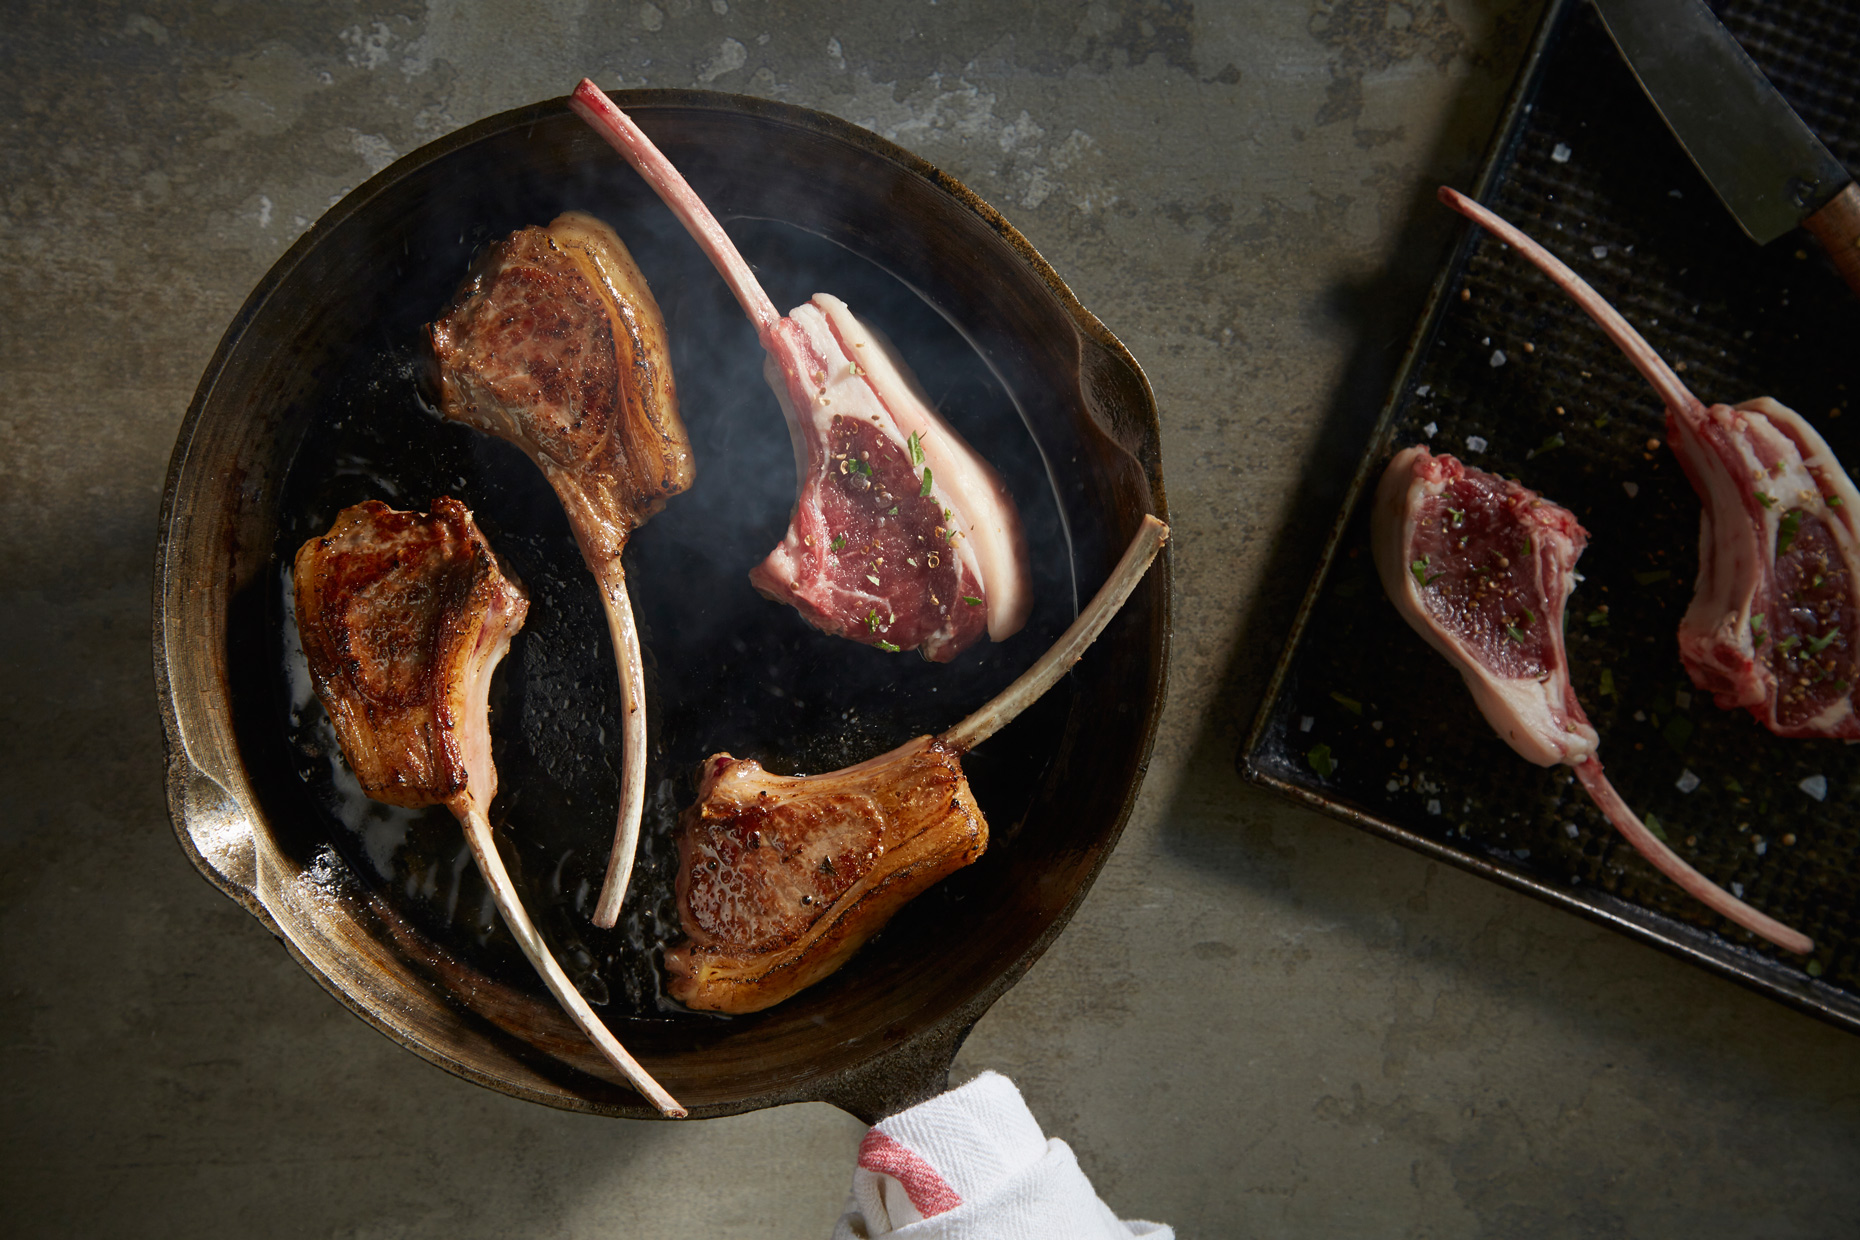 Lamb Chops in Cast Iron Skillet photo by Chris Kessler Photography. Sliced meat. Chris Kessler is a freelance Photographer based in Milwaukee Wisconsin. Specializing in Food photography and portraiture.